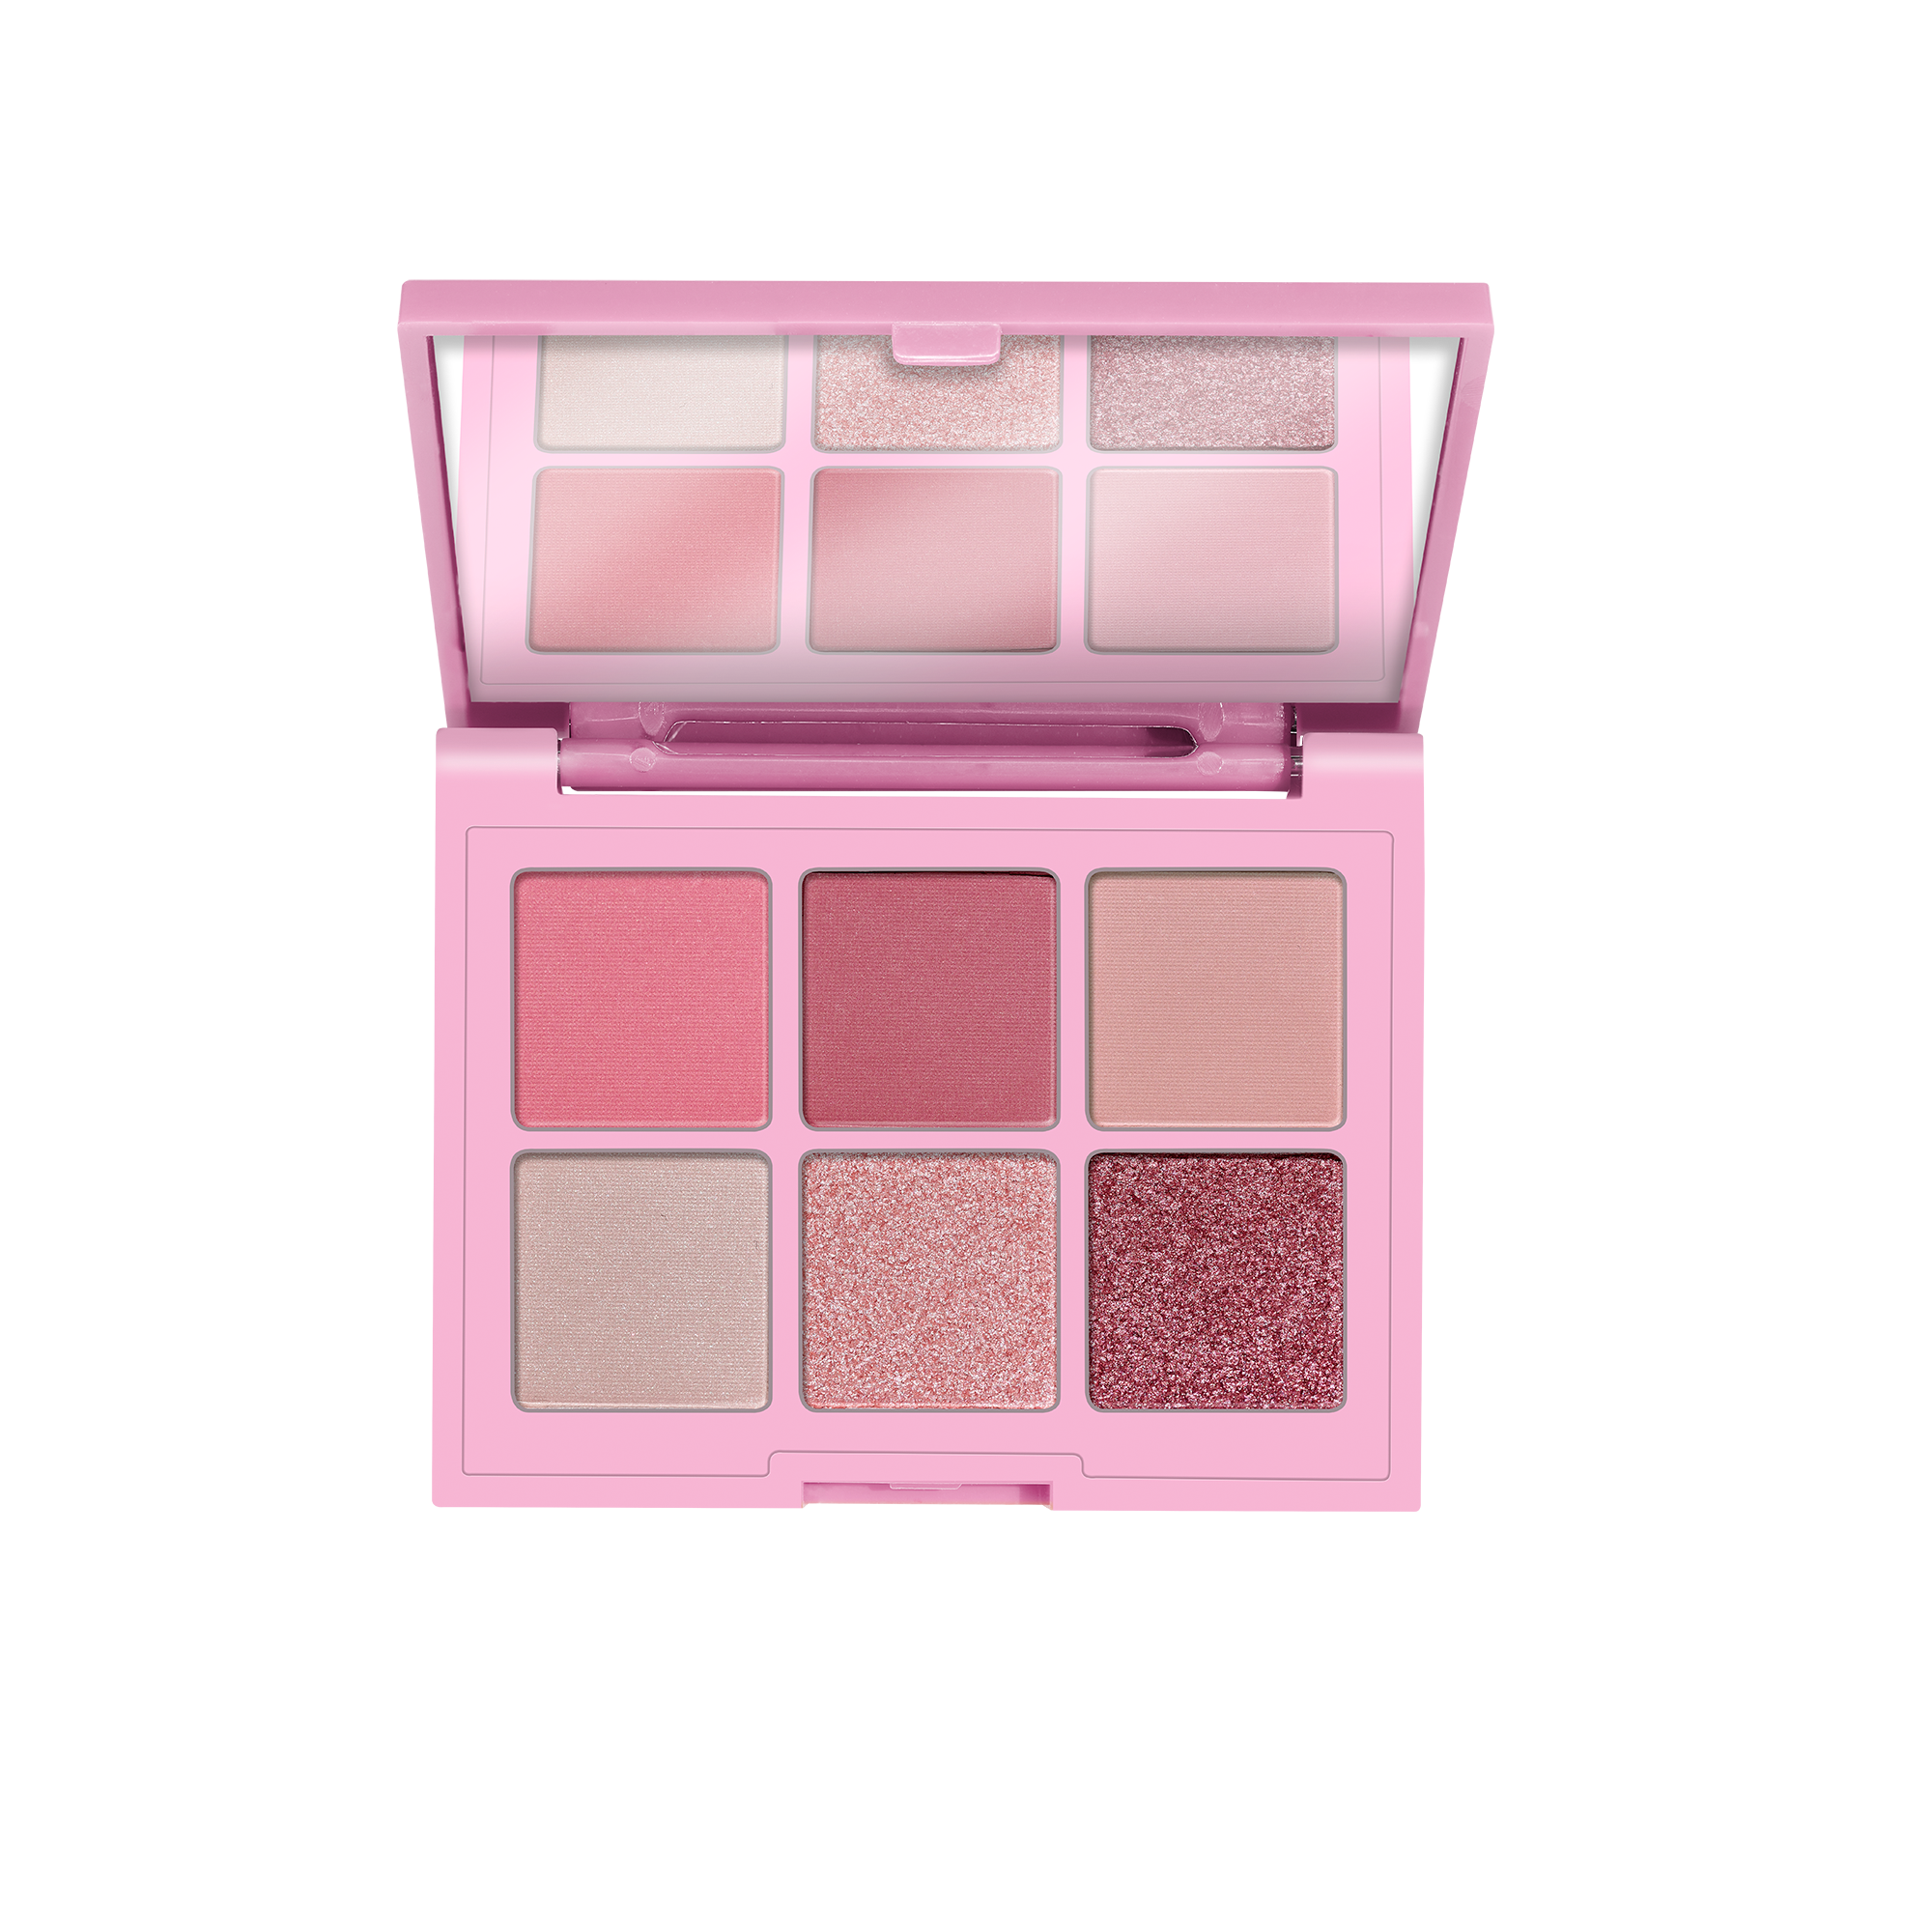 essence will on – makeup eyeshadow palette ROSE my go